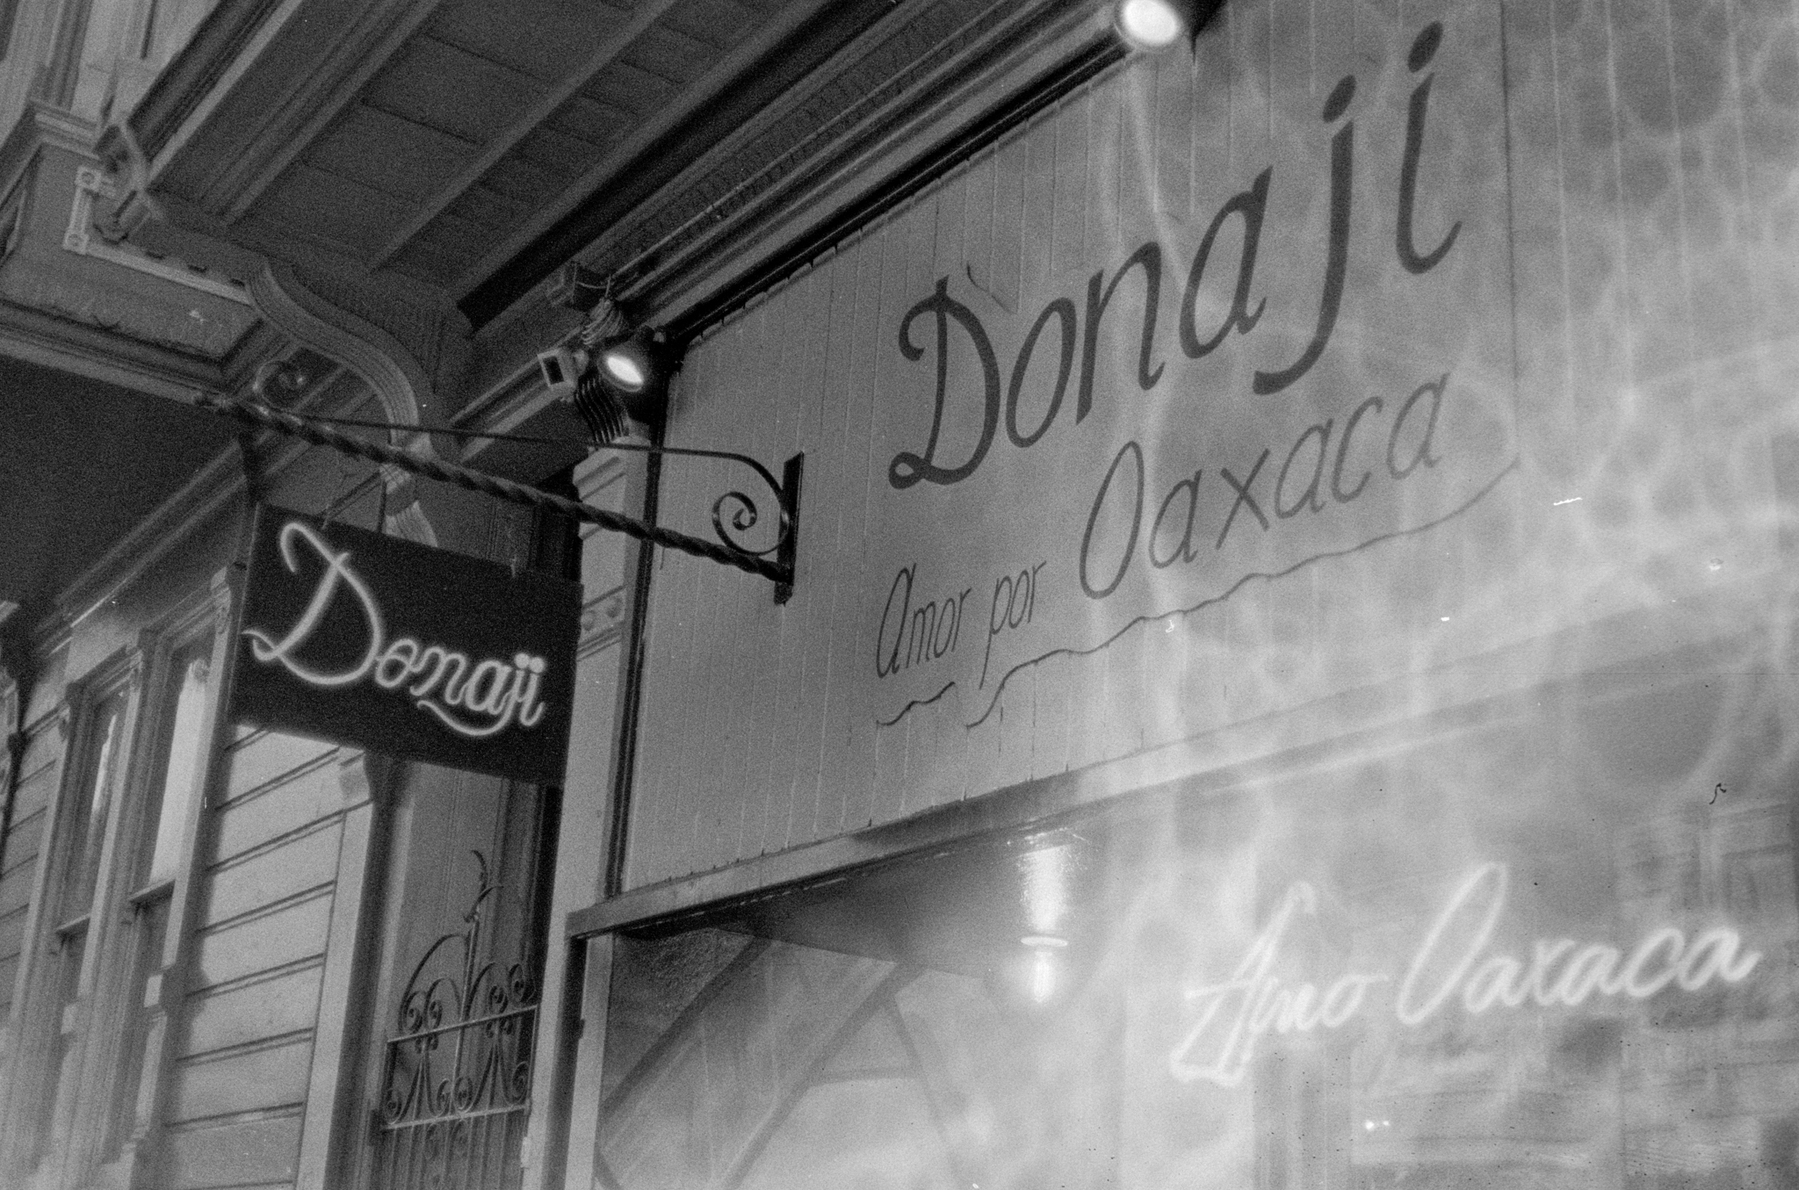 a scan of a black and white photo showing a Mexican restaurant called Donaji and its front door. There are a bunch of bubble patterns on the right side of the image